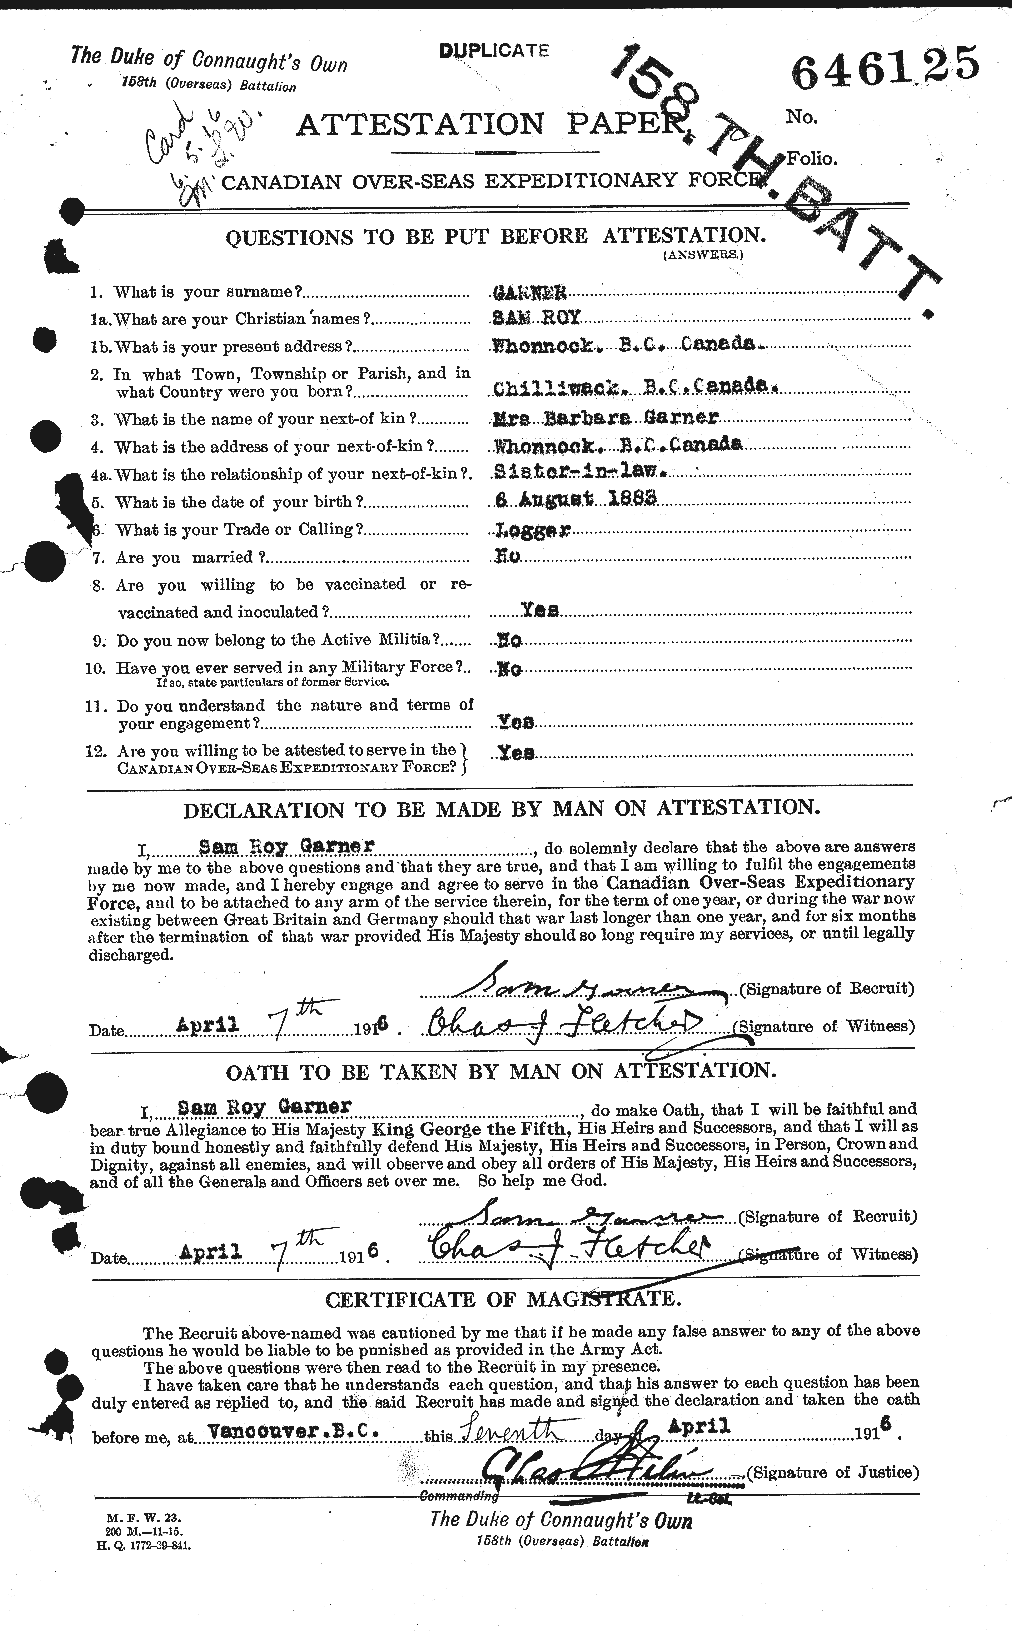 Personnel Records of the First World War - CEF 341881a